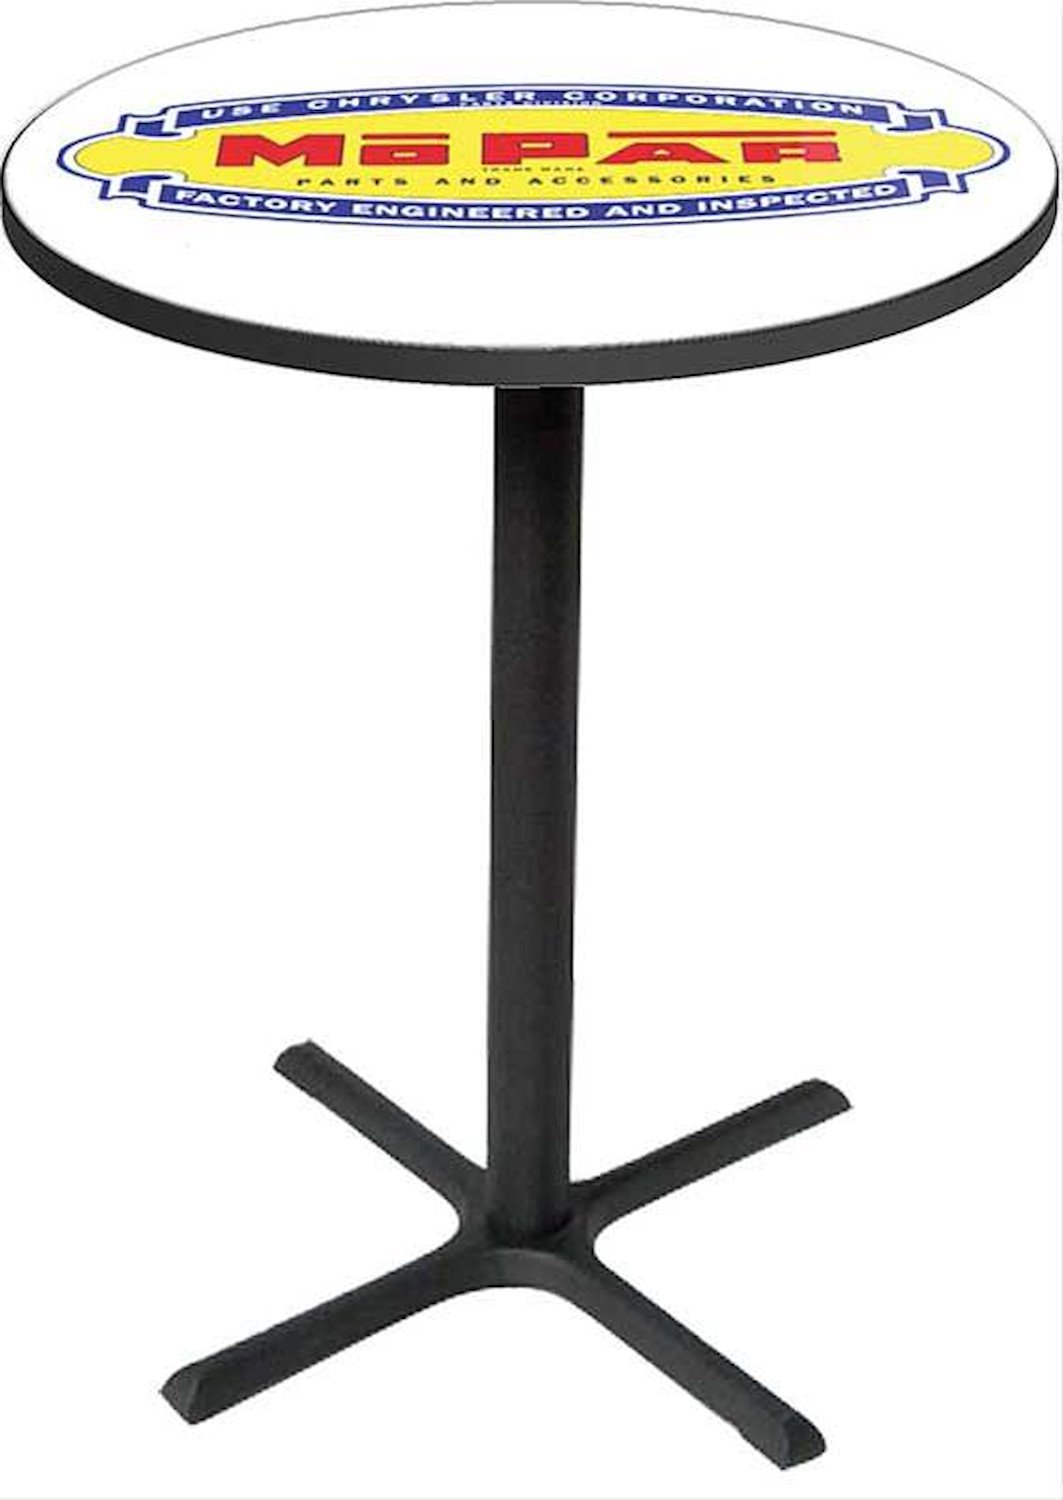 MD671101 Pub Table With Black Base 1948-53 Style Mopar parts And Accessories Logo